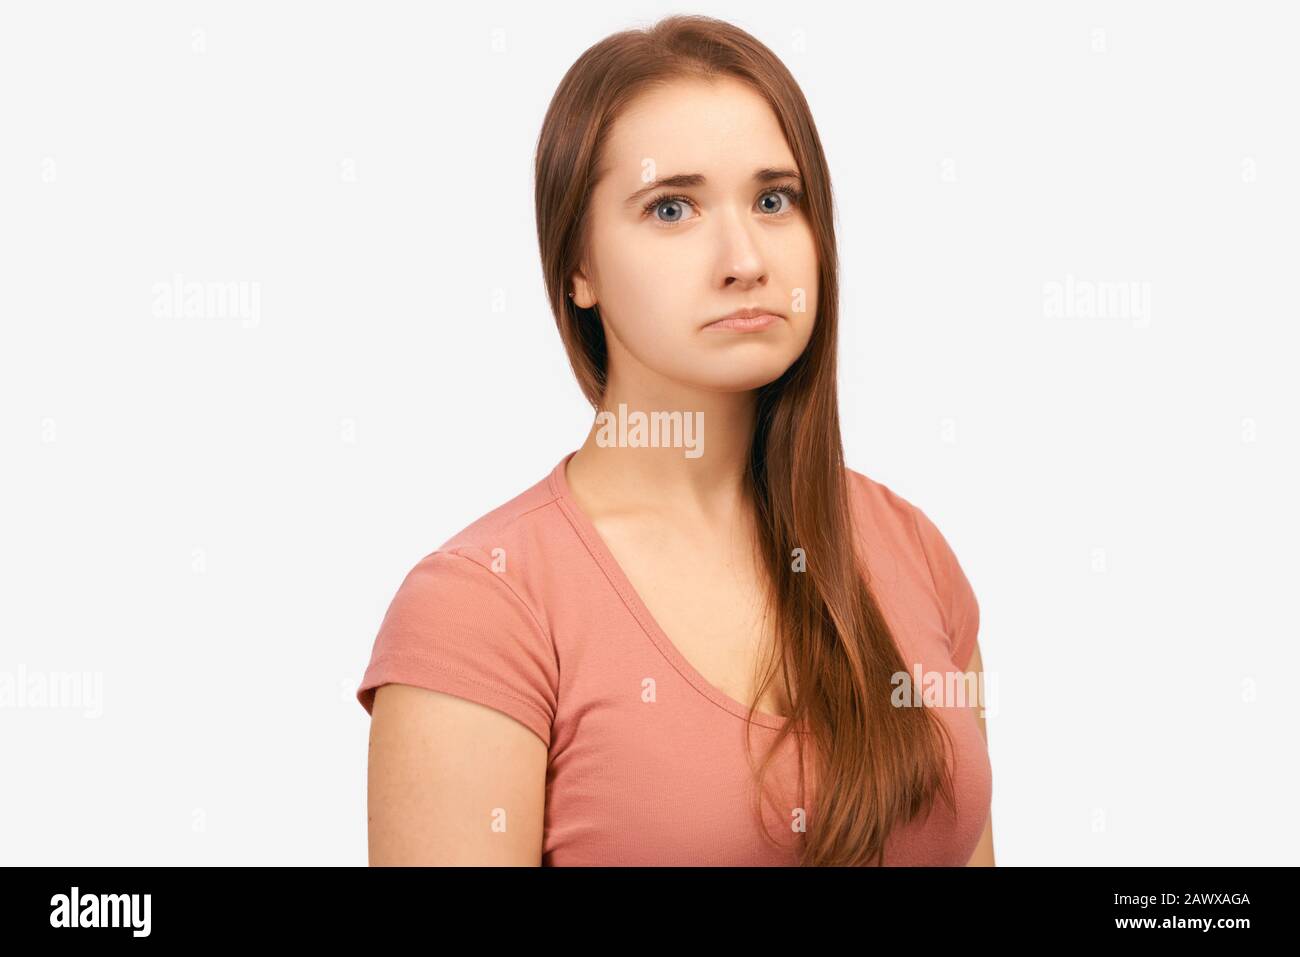 Emotionally wounded woman sad expression on face Stock Photo Alamy